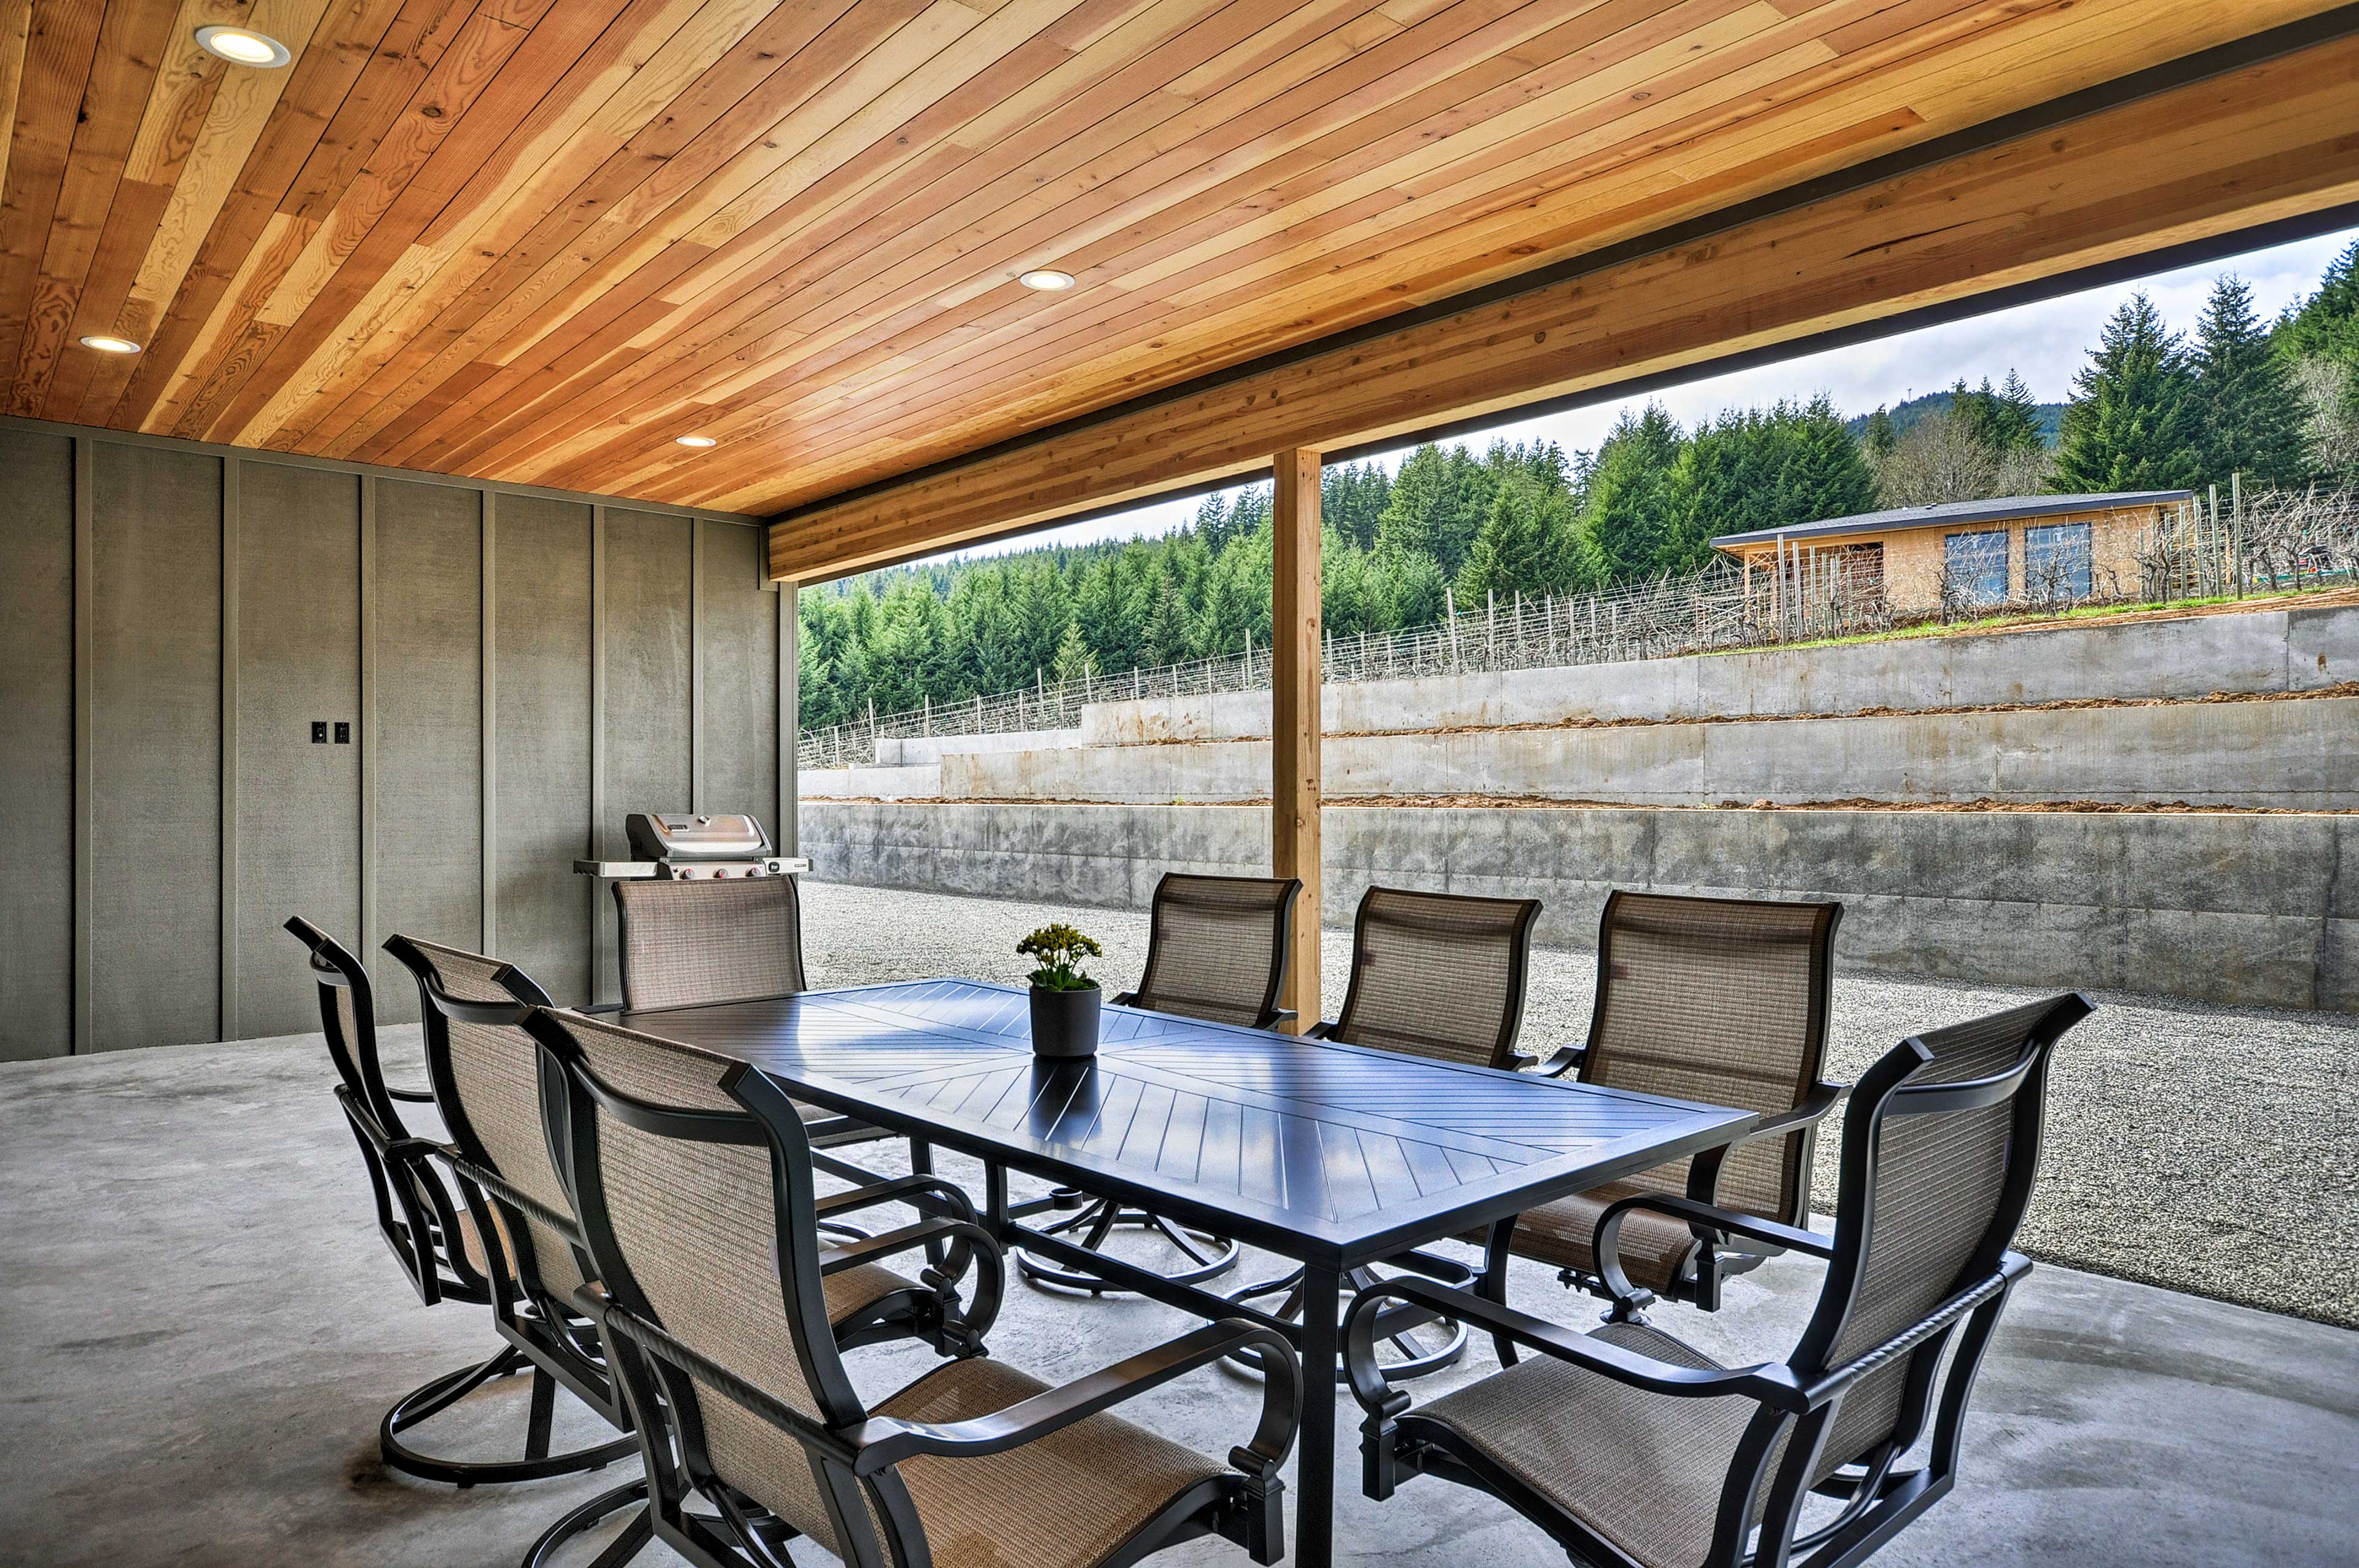 Covered Patio | Outdoor Dining | Gas Grill | Vineyard Views